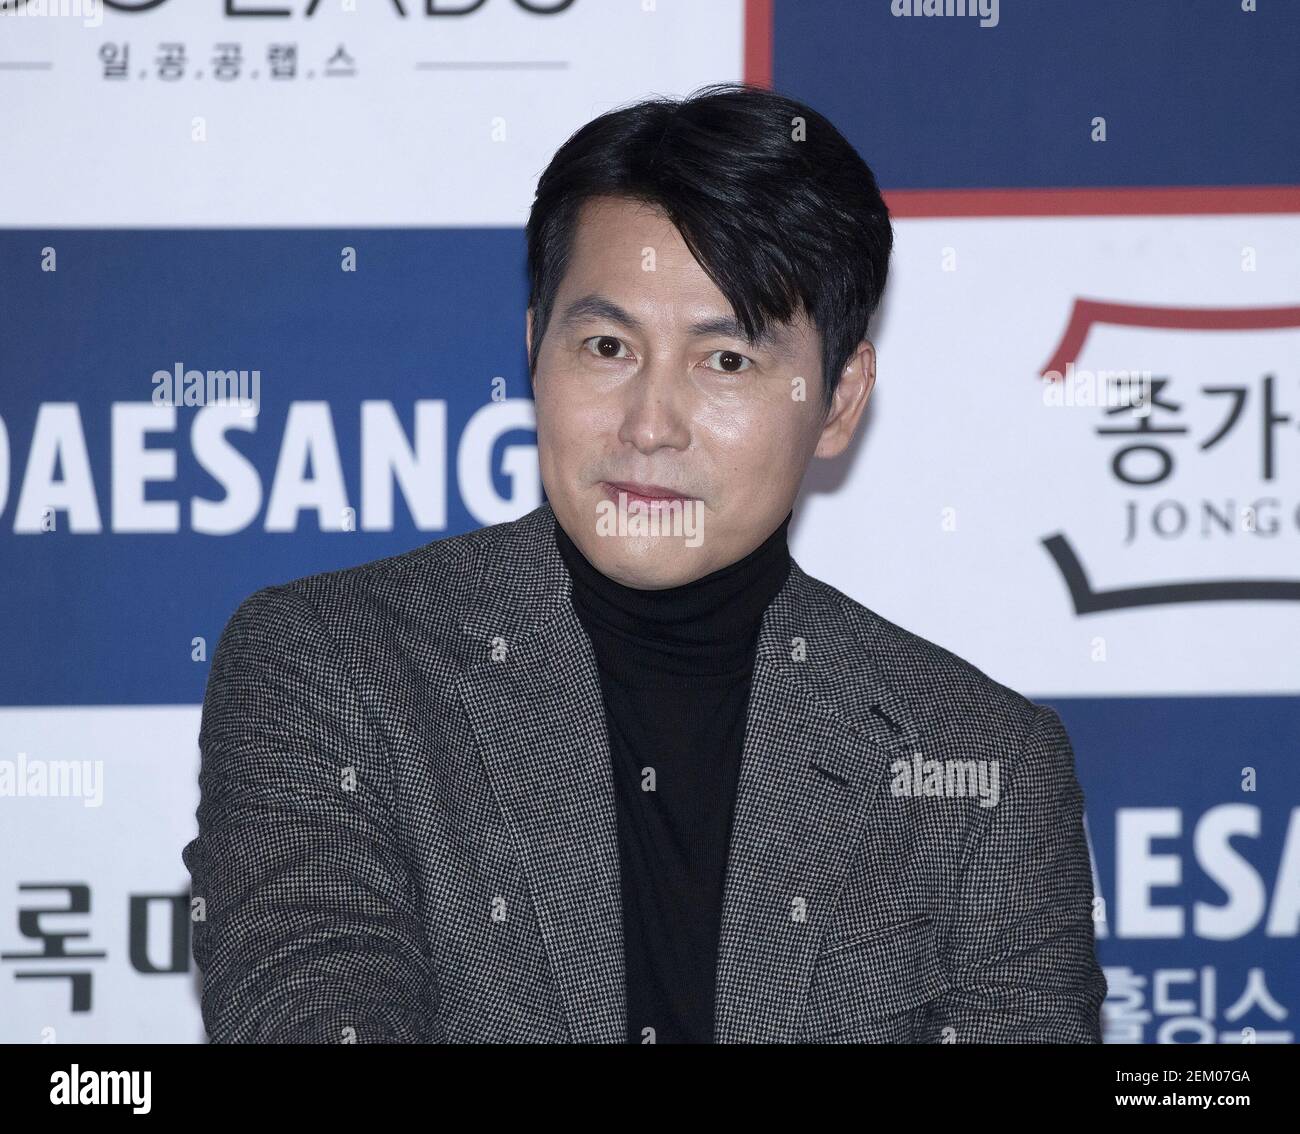 12 November 2020 - Seoul, South Korea : South Korean actor Jung Woo-sung, attend a hands printing event for the "41st Blue Dragon Film Awards" at CGV Cinema in Seoul, South Korea on November 12, 2020. (Photo by: Lee Young-ho/Sipa USA) Stock Photo